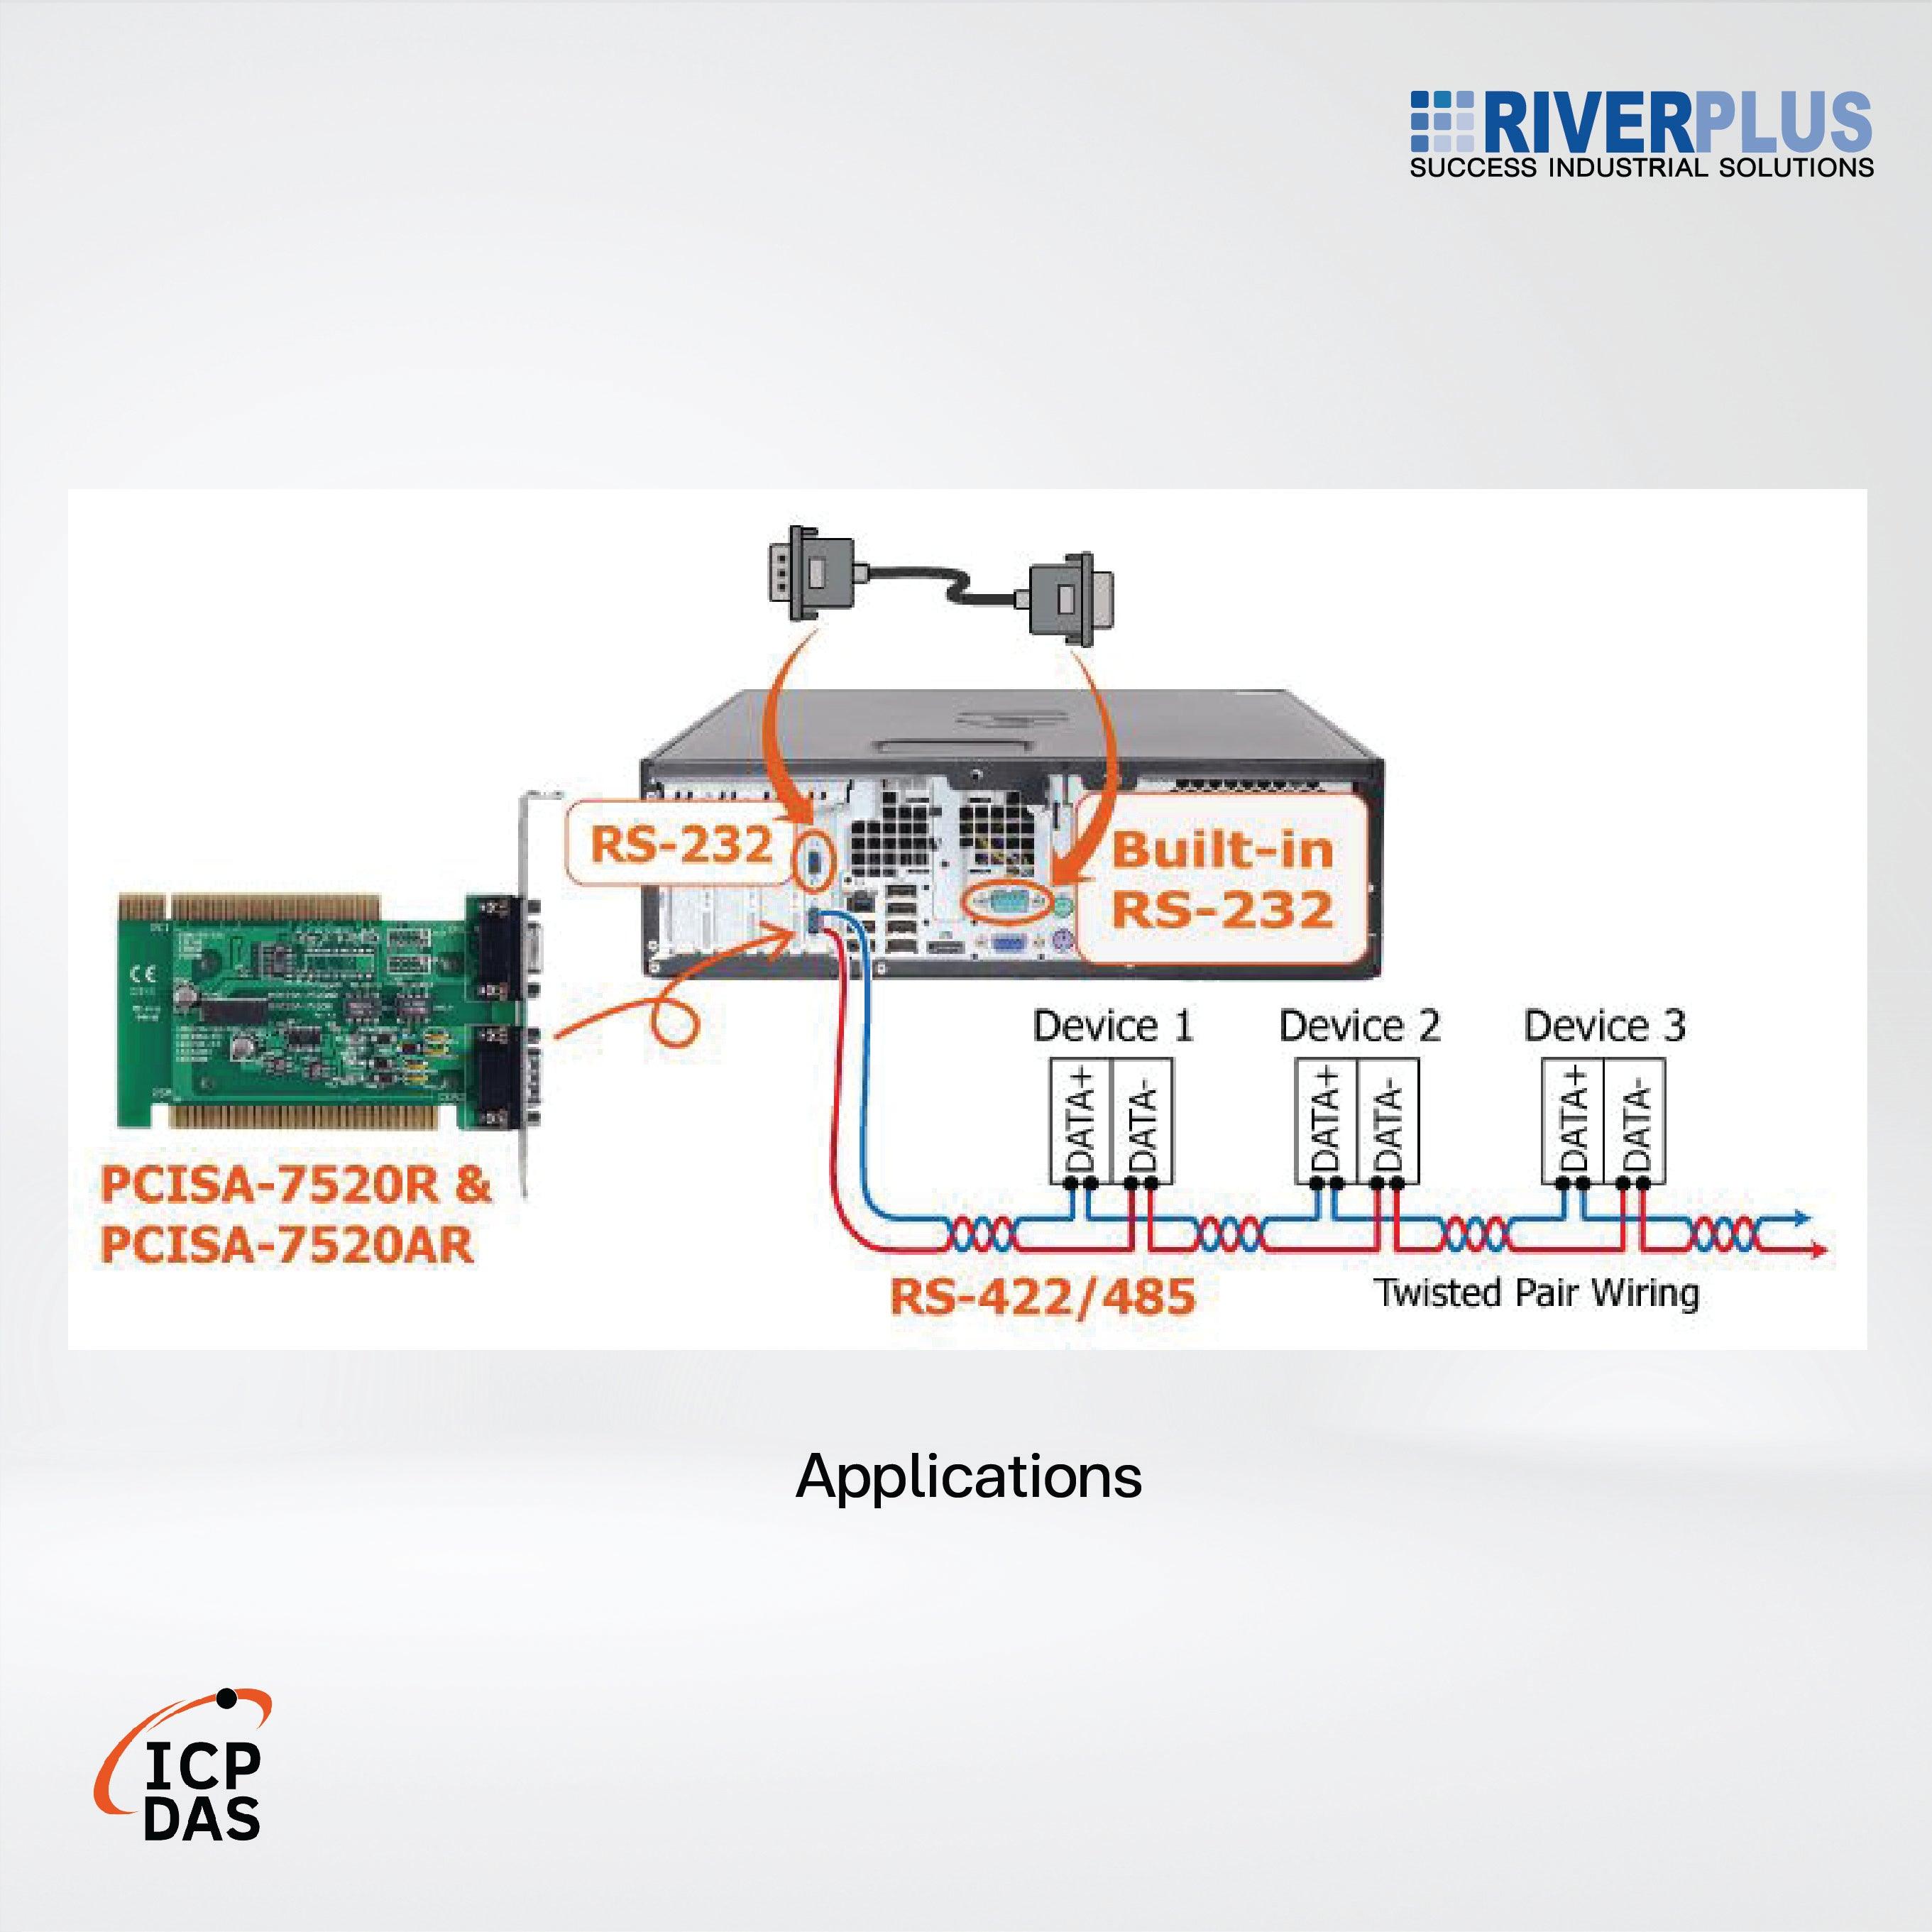 PCISA-7520R Isolated RS-232 to RS-485 Converter Card - Riverplus